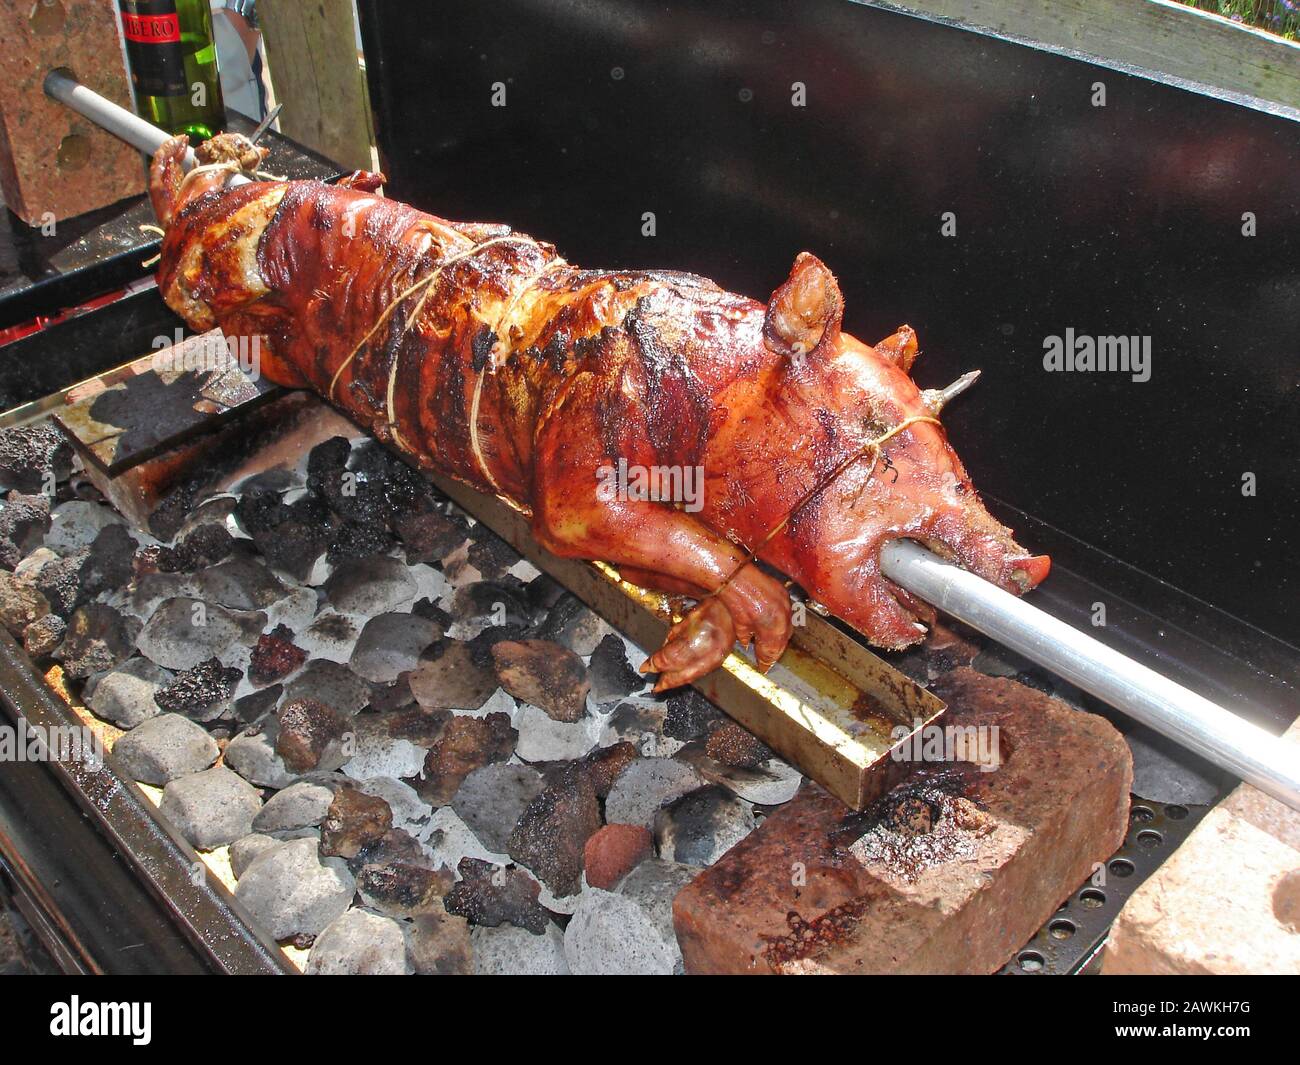 Suckling pig on a hog roast roasting on a spit over coals on a barbecue Stock Photo